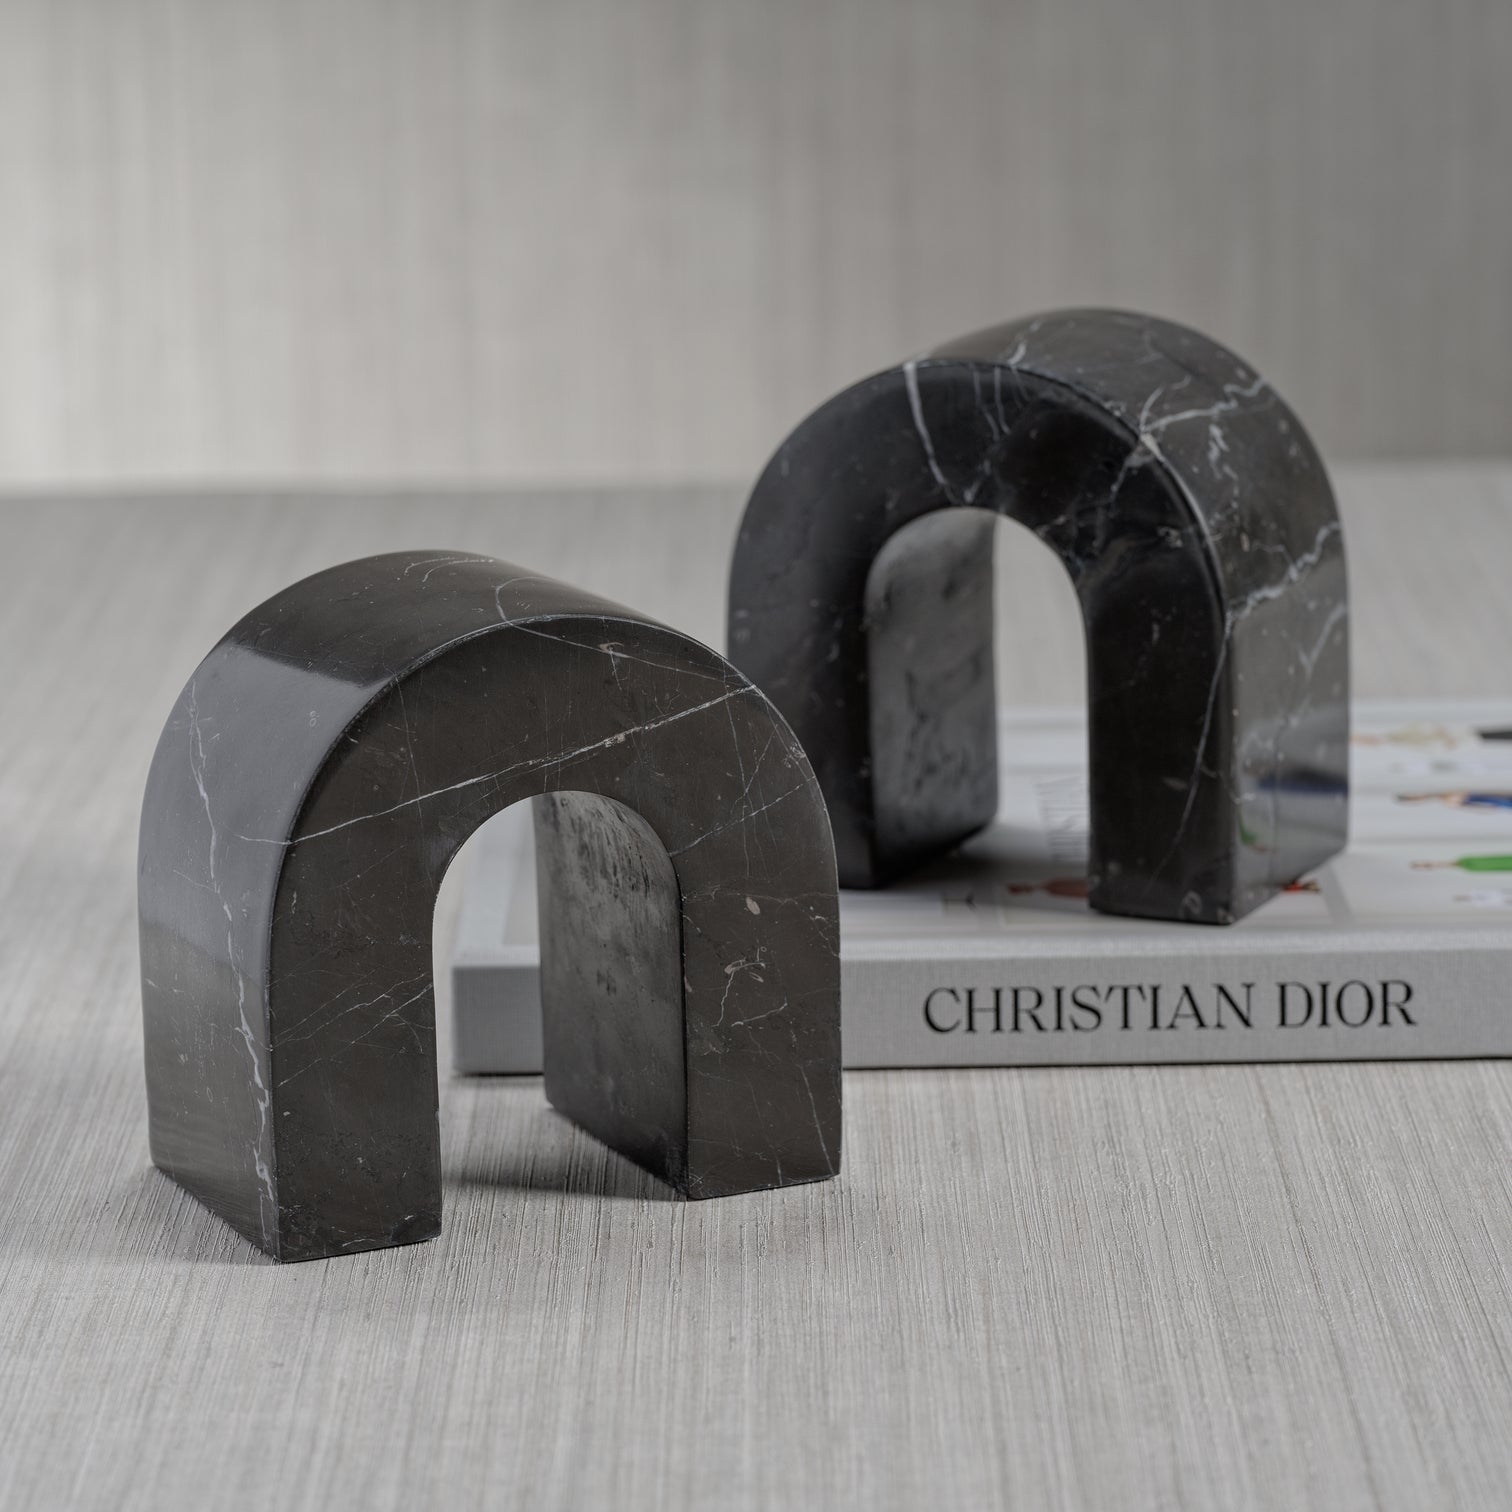 Marquino Marble Bookends - Set of 2 - Black